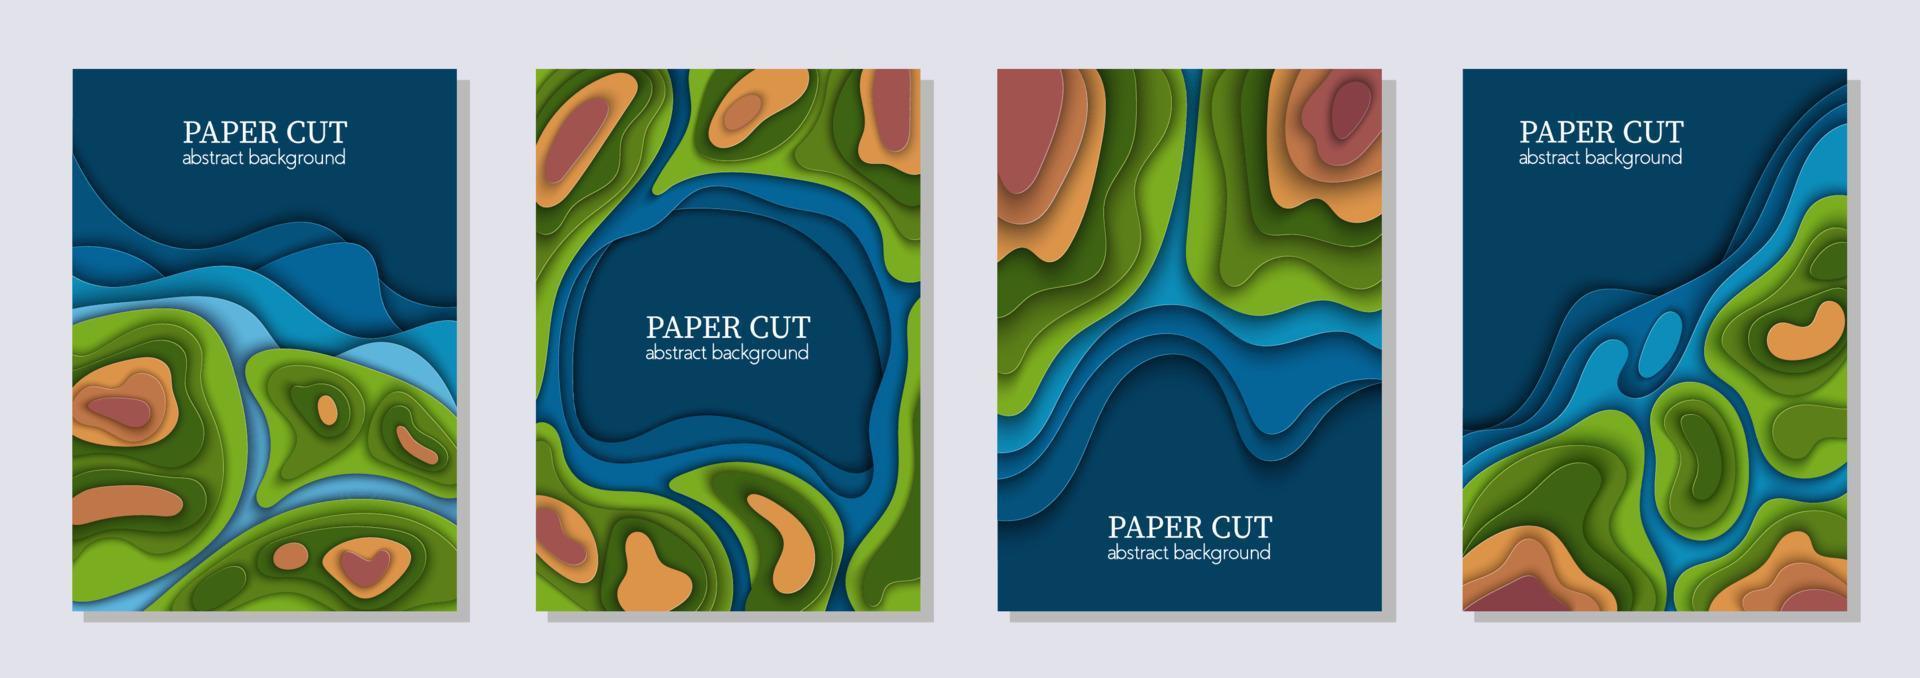 Vertical vector set of 4 blue green flyers with paper cut waves shapes, world earth map, ecology. 3D abstract art, design layout for presentations, flyers, posters, prints, decoration, cards, brochure